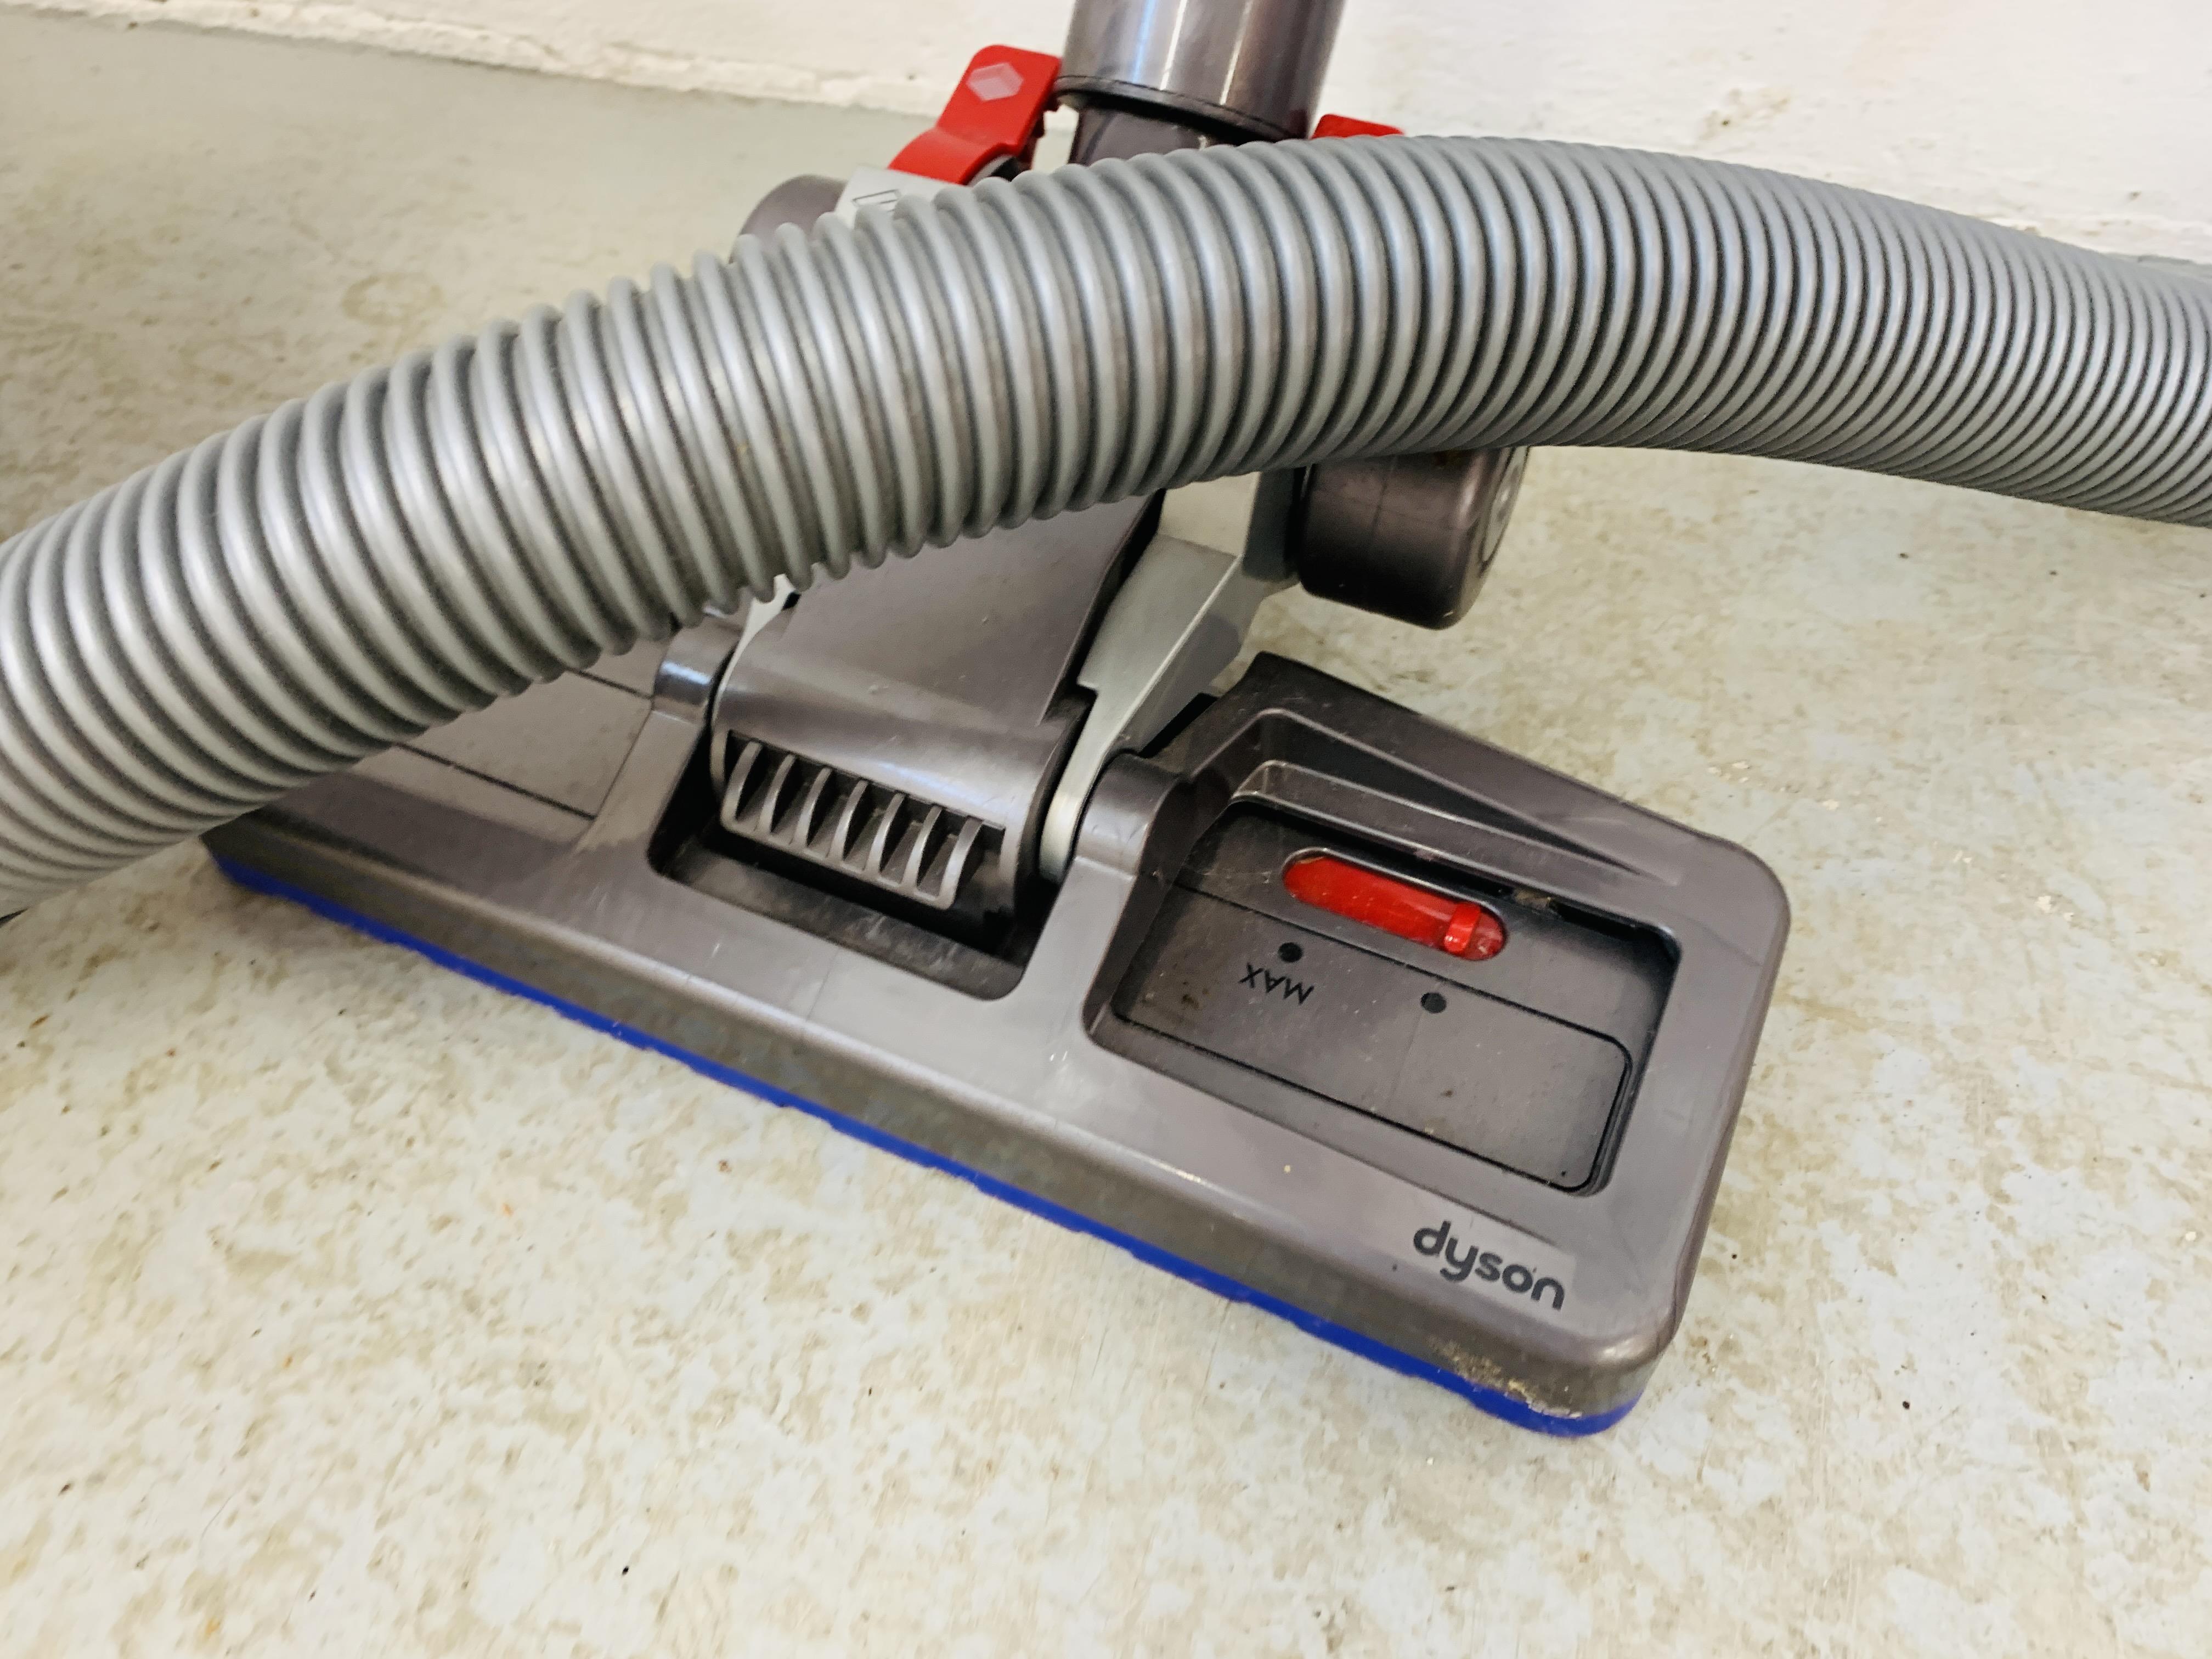 A DYSON DC39 VACUUM CLEANER - SOLD AS SEEN - Image 3 of 5